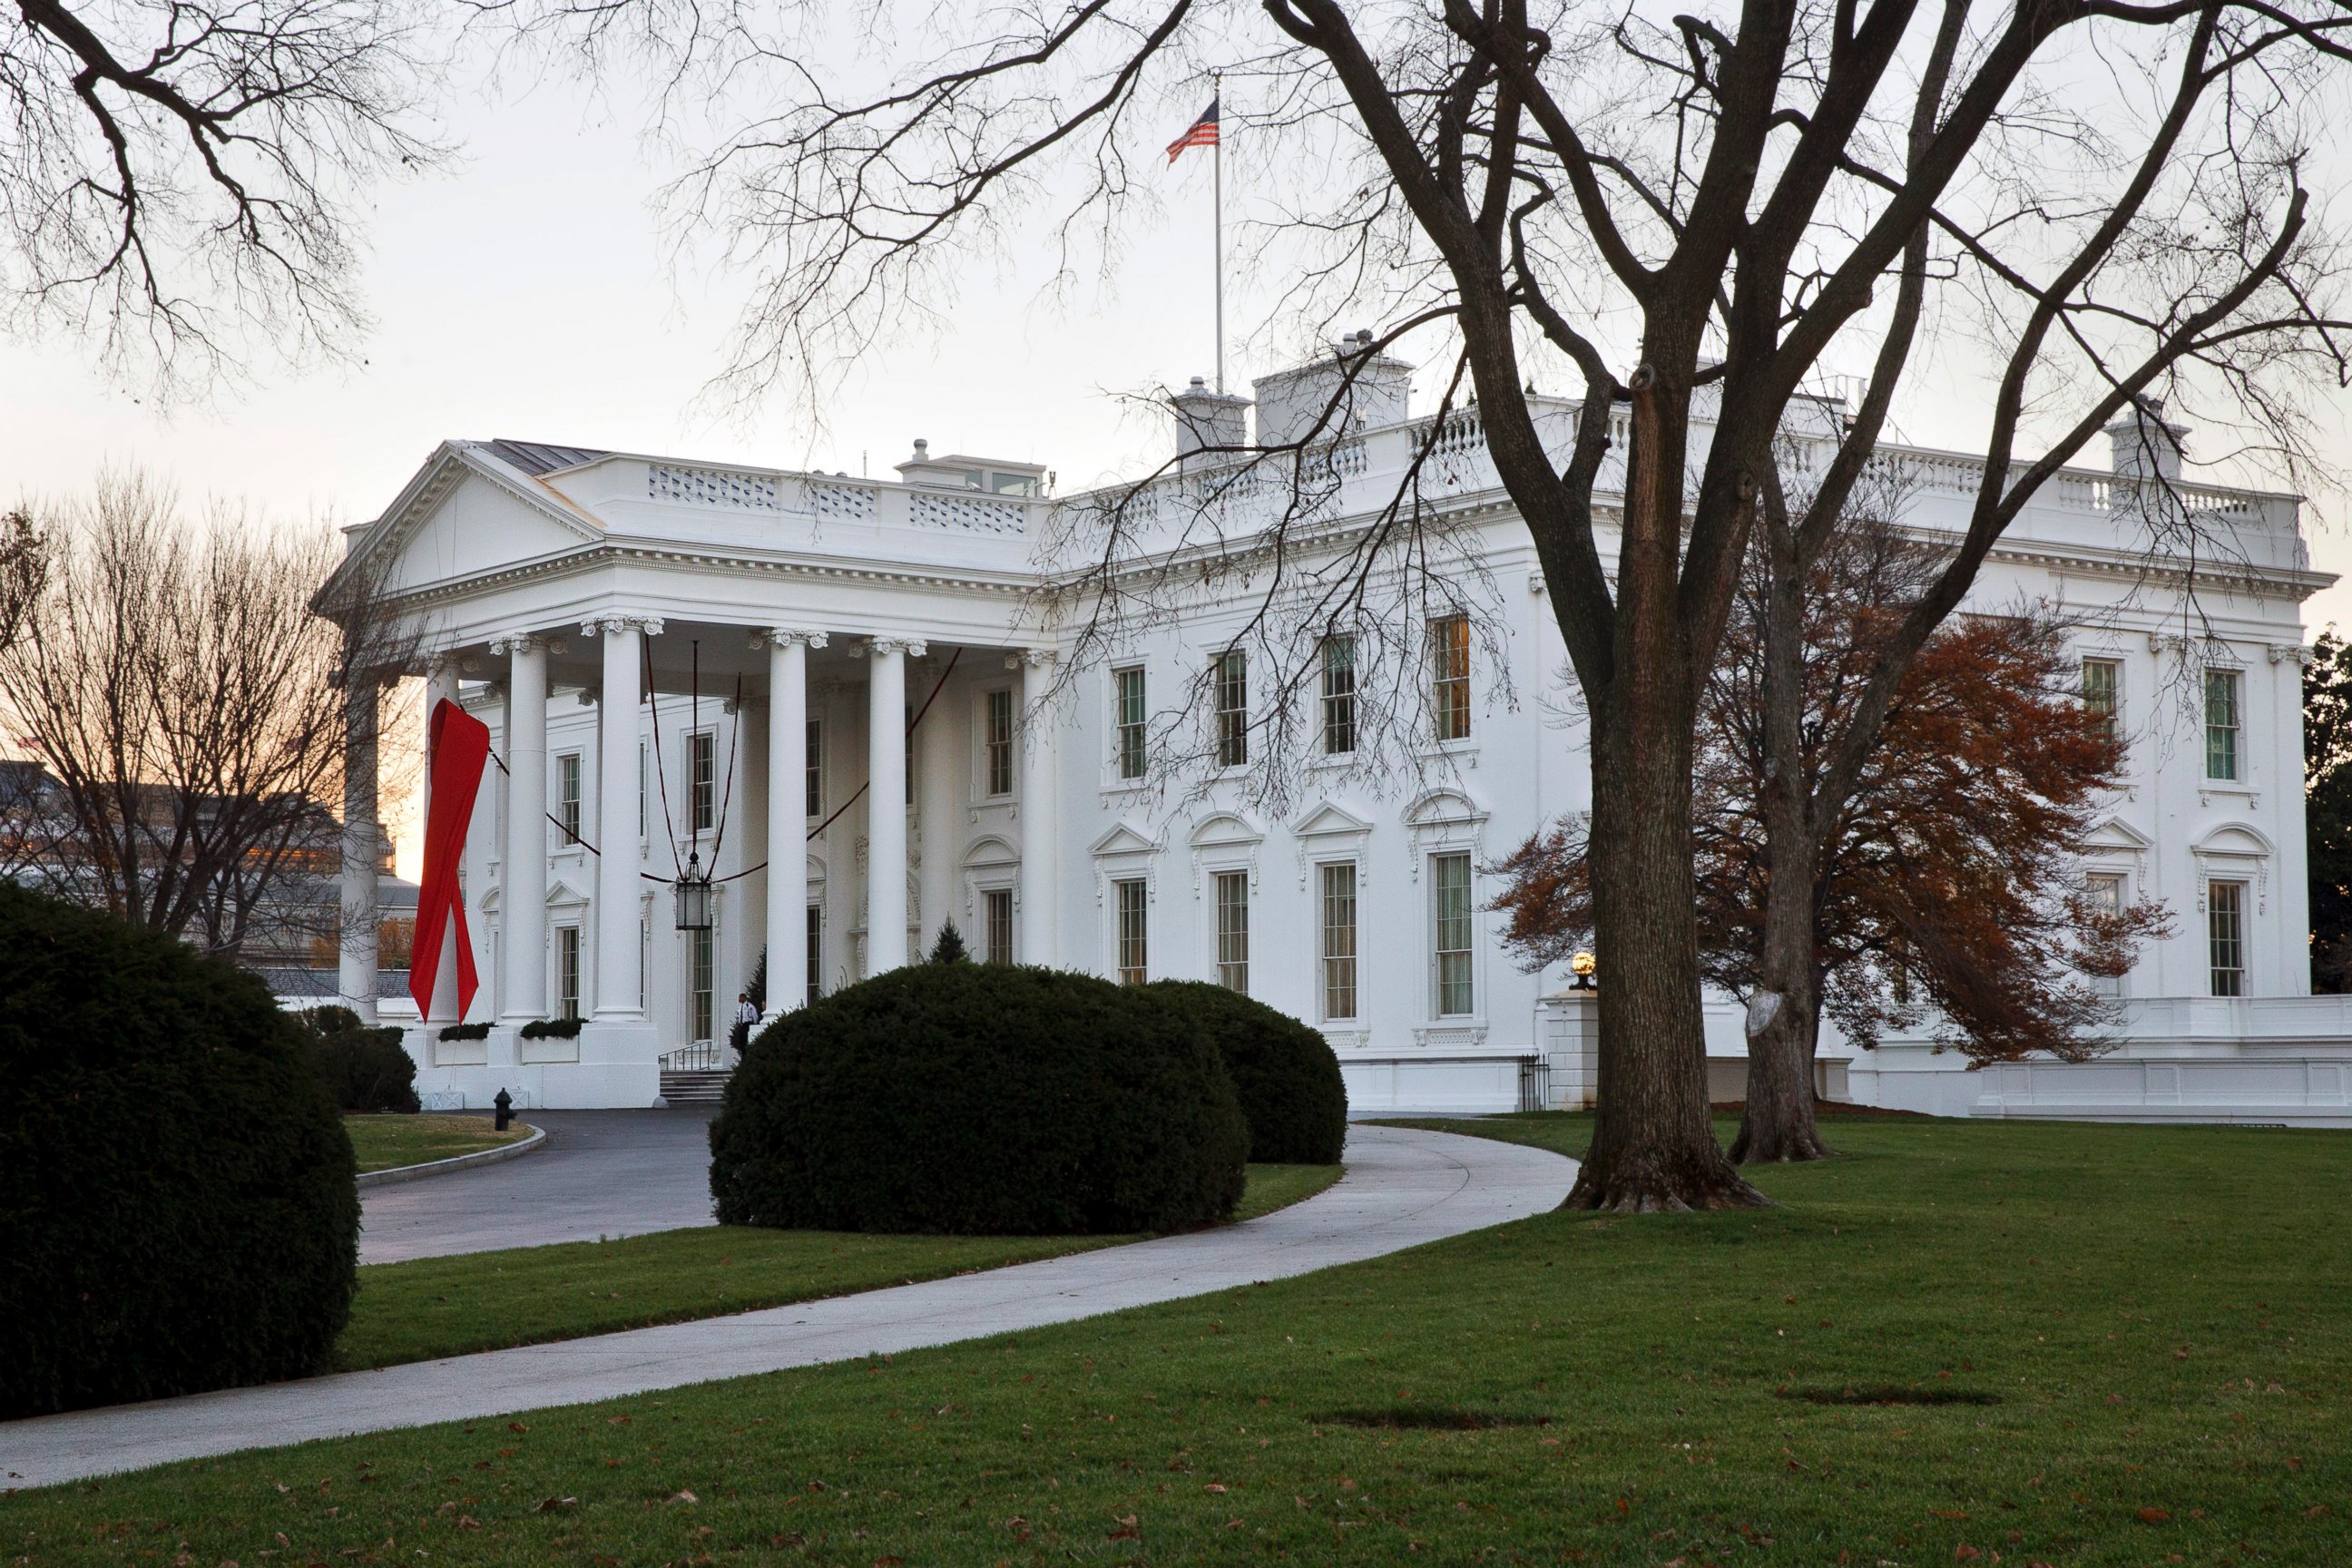 PHOTO: The White House in Washington is decorated with a red ribbon in honor of World AIDS Day, Dec. 1, 2014.